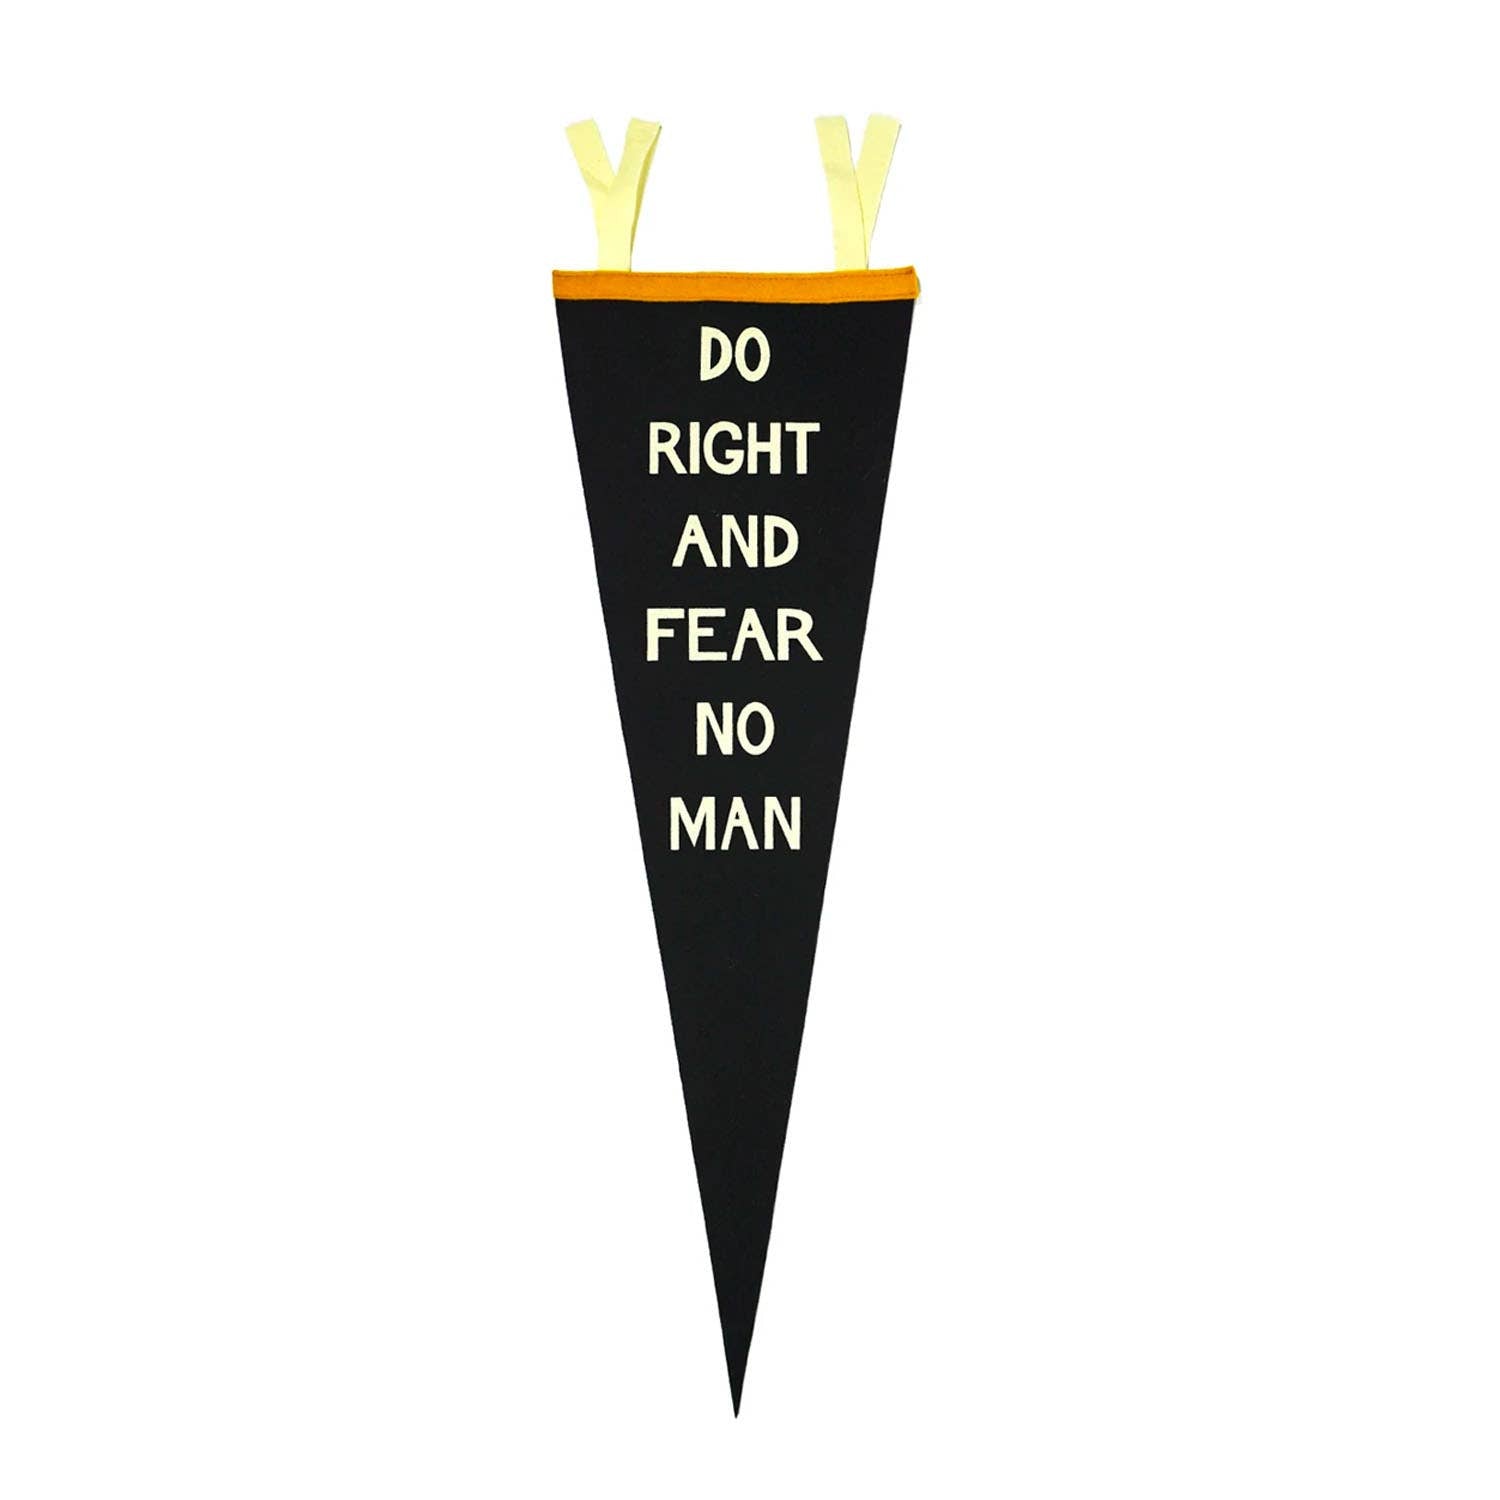 Oxford Pennant Do Right and Fear No Man Pennant